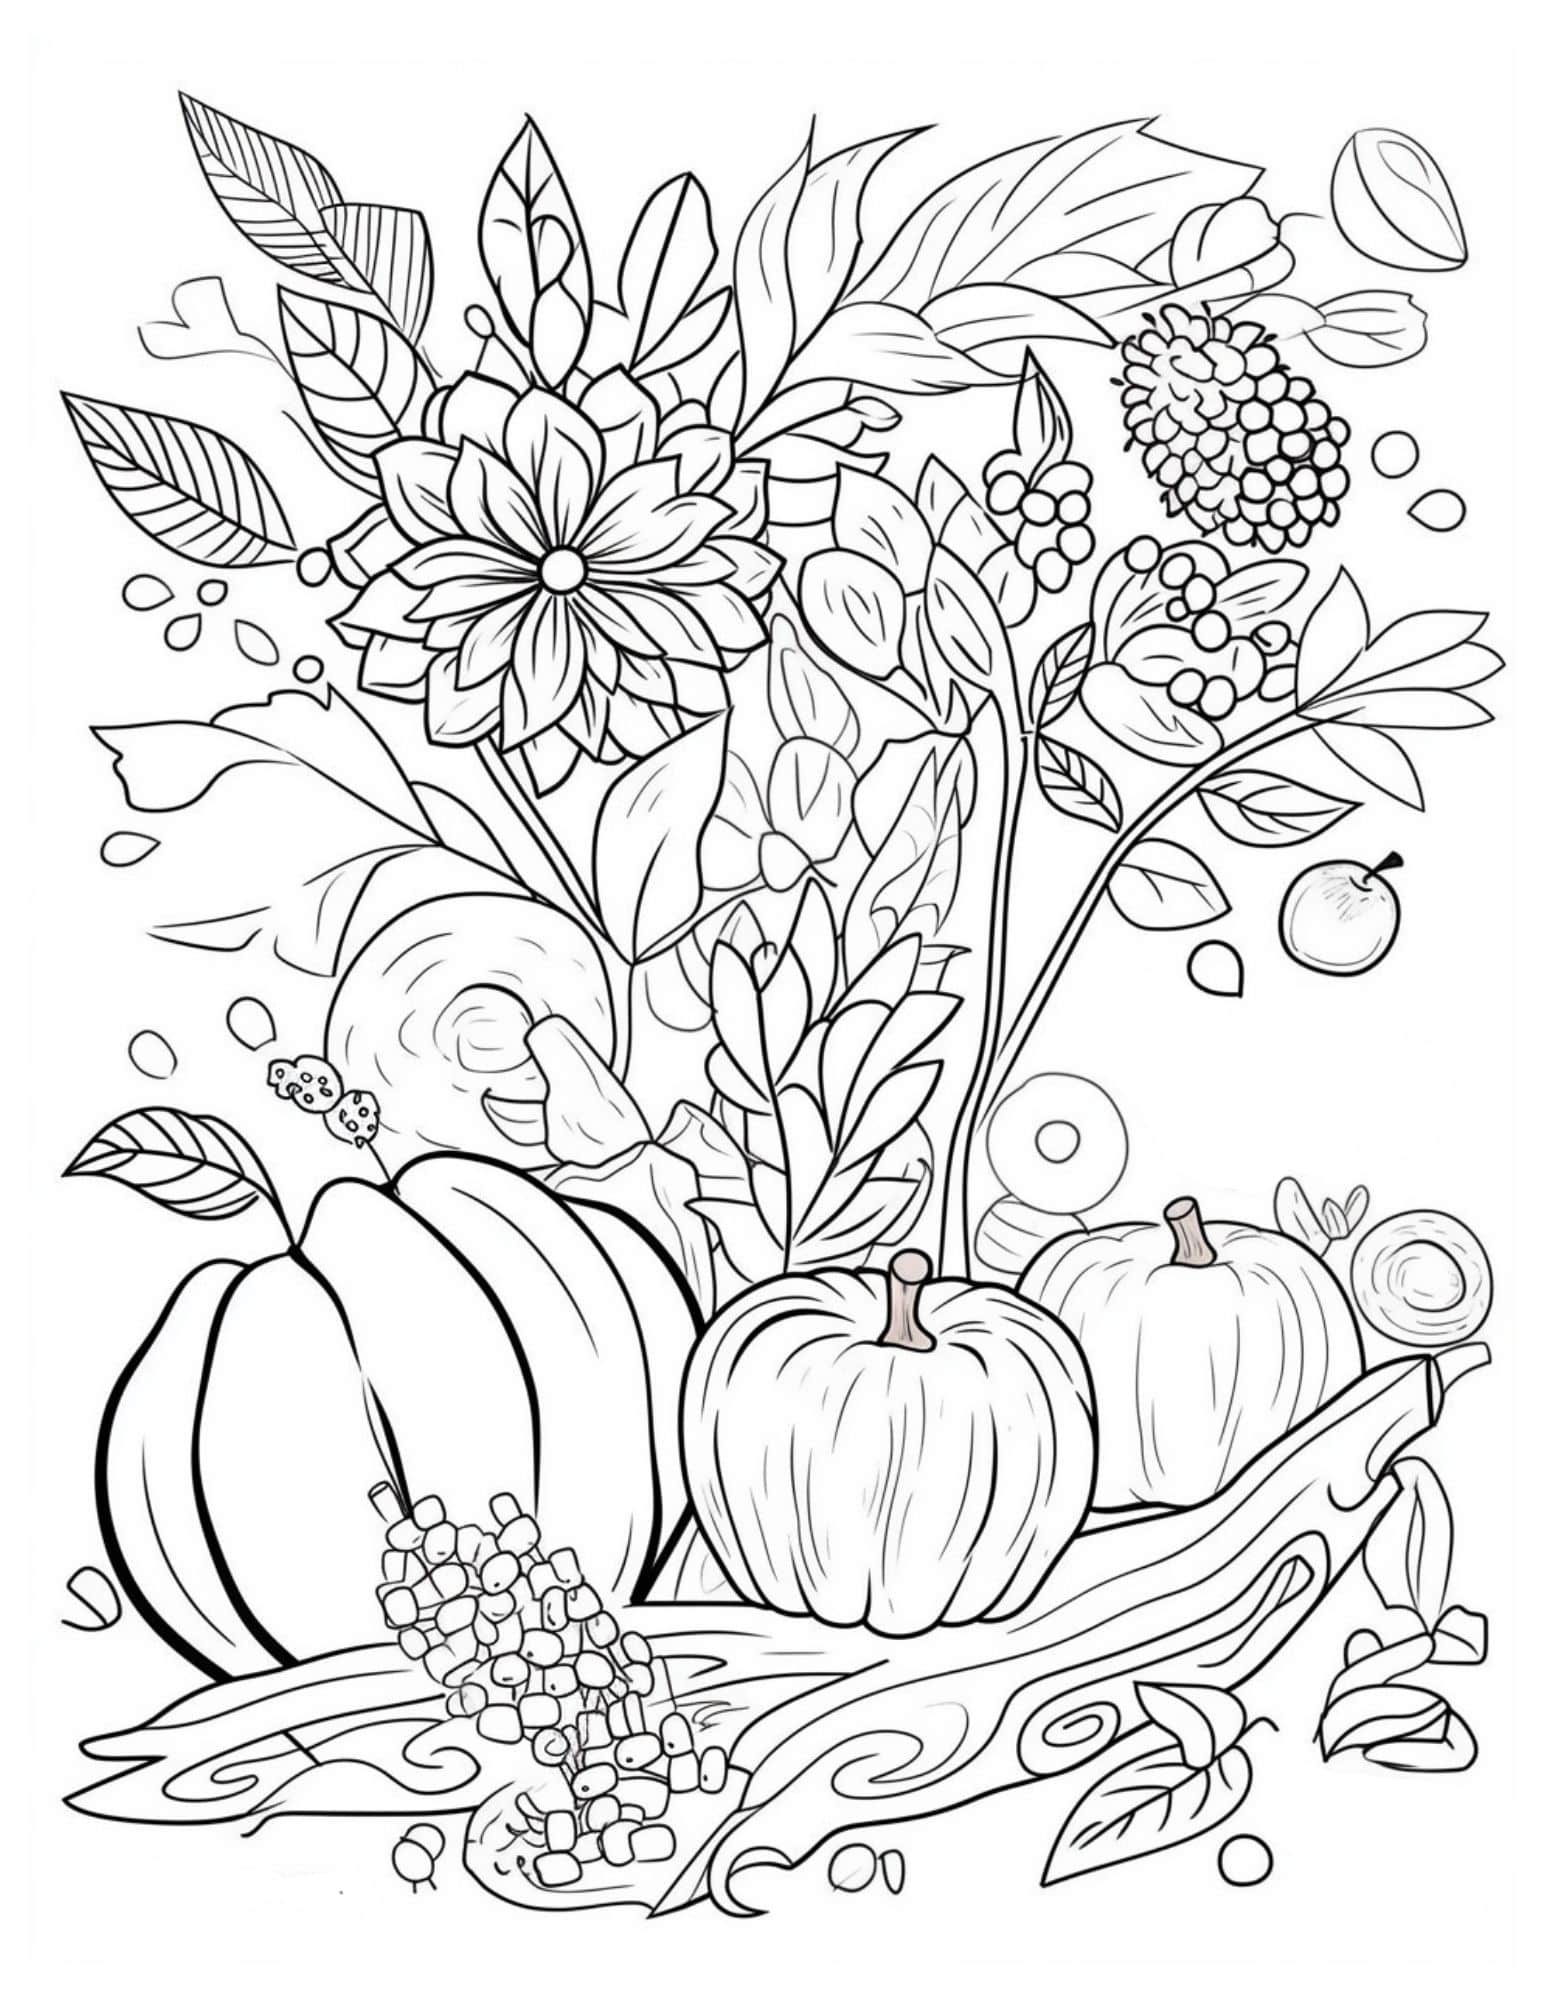 47 Fall Coloring Pages For Both Kids And Adults - Our Mindful Life